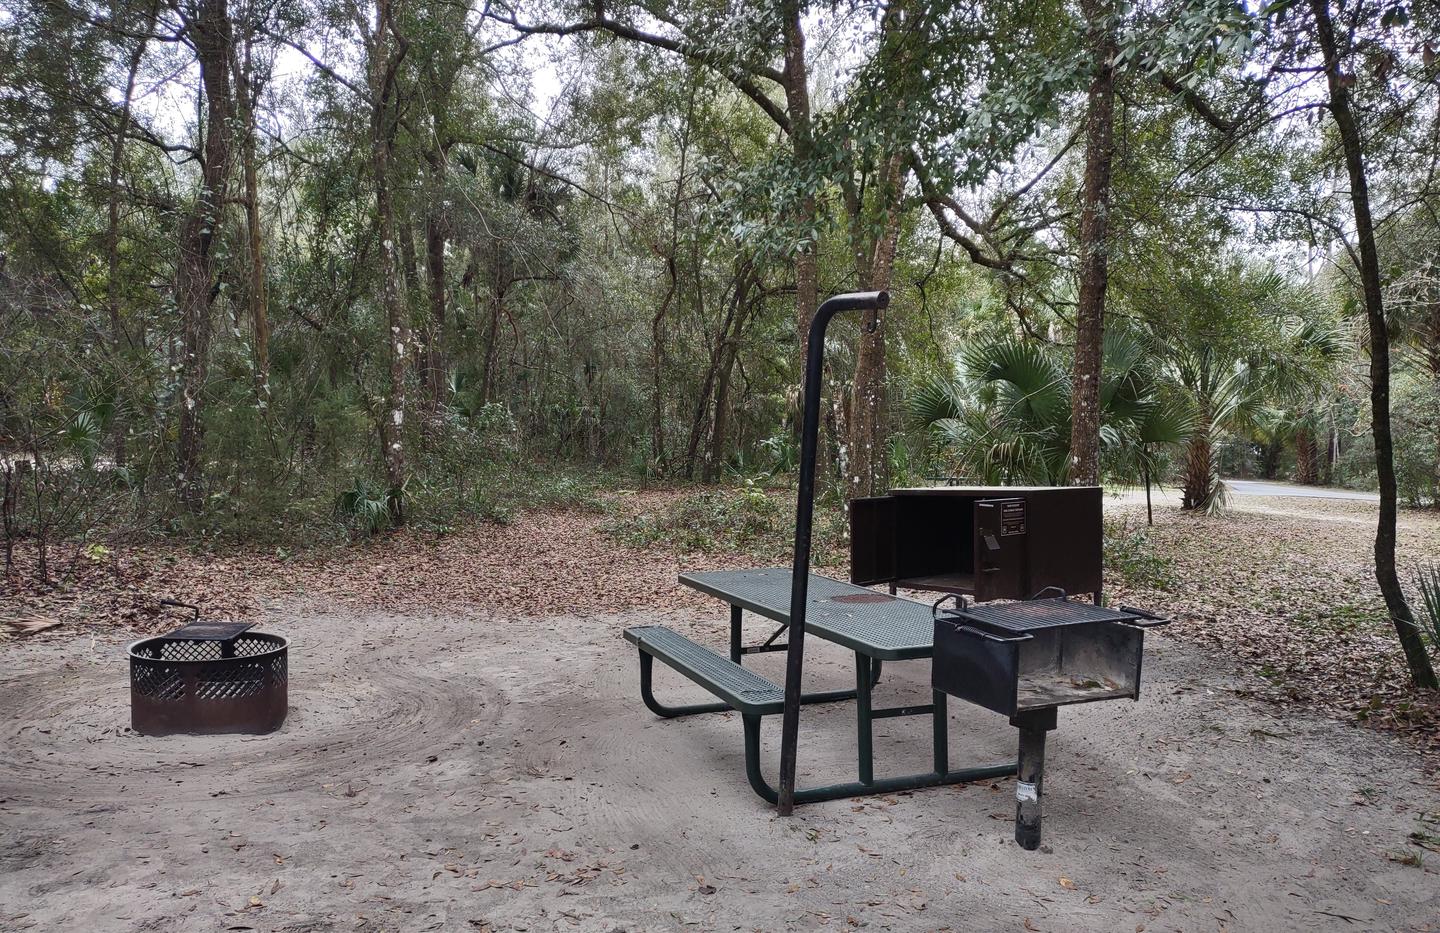 Another view of site 14Amenities: fire ring, picnic table, grill, light pole, bear-proof storage locker